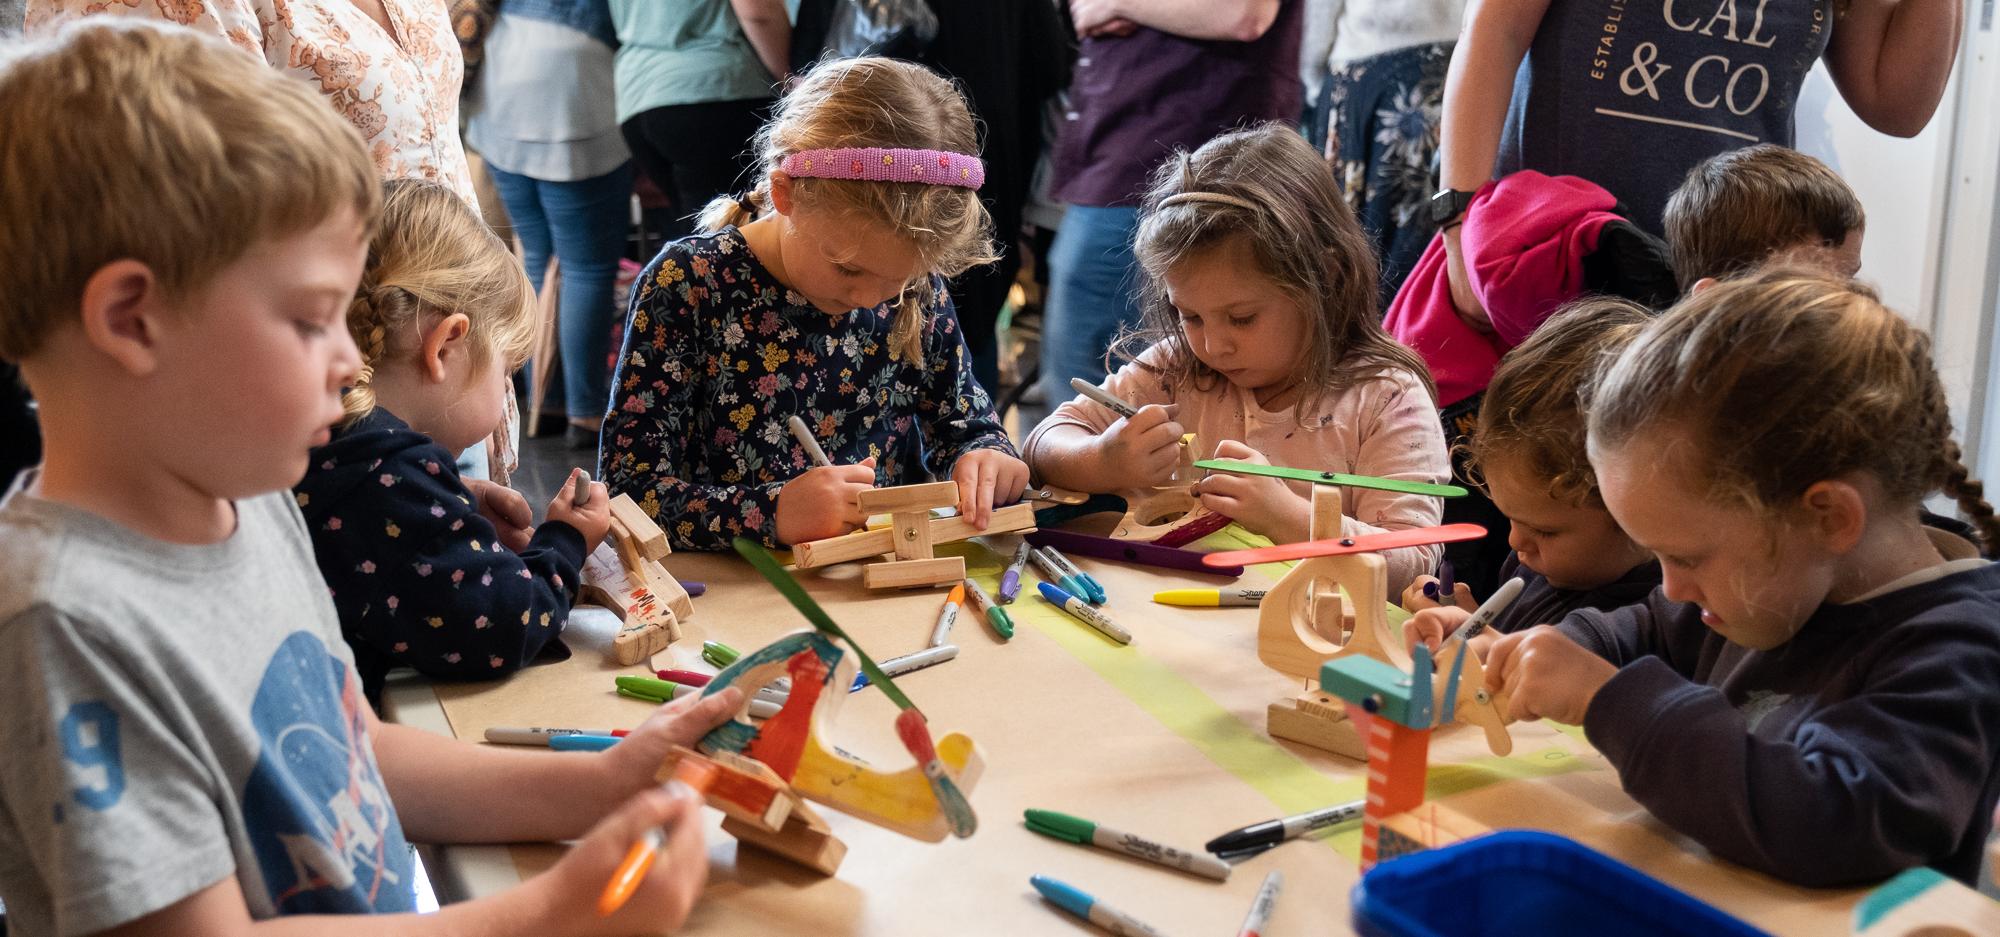 A group of children gathered around a table playing with various wooden arts and crafts items, and staring at their creations with intense concentration faces